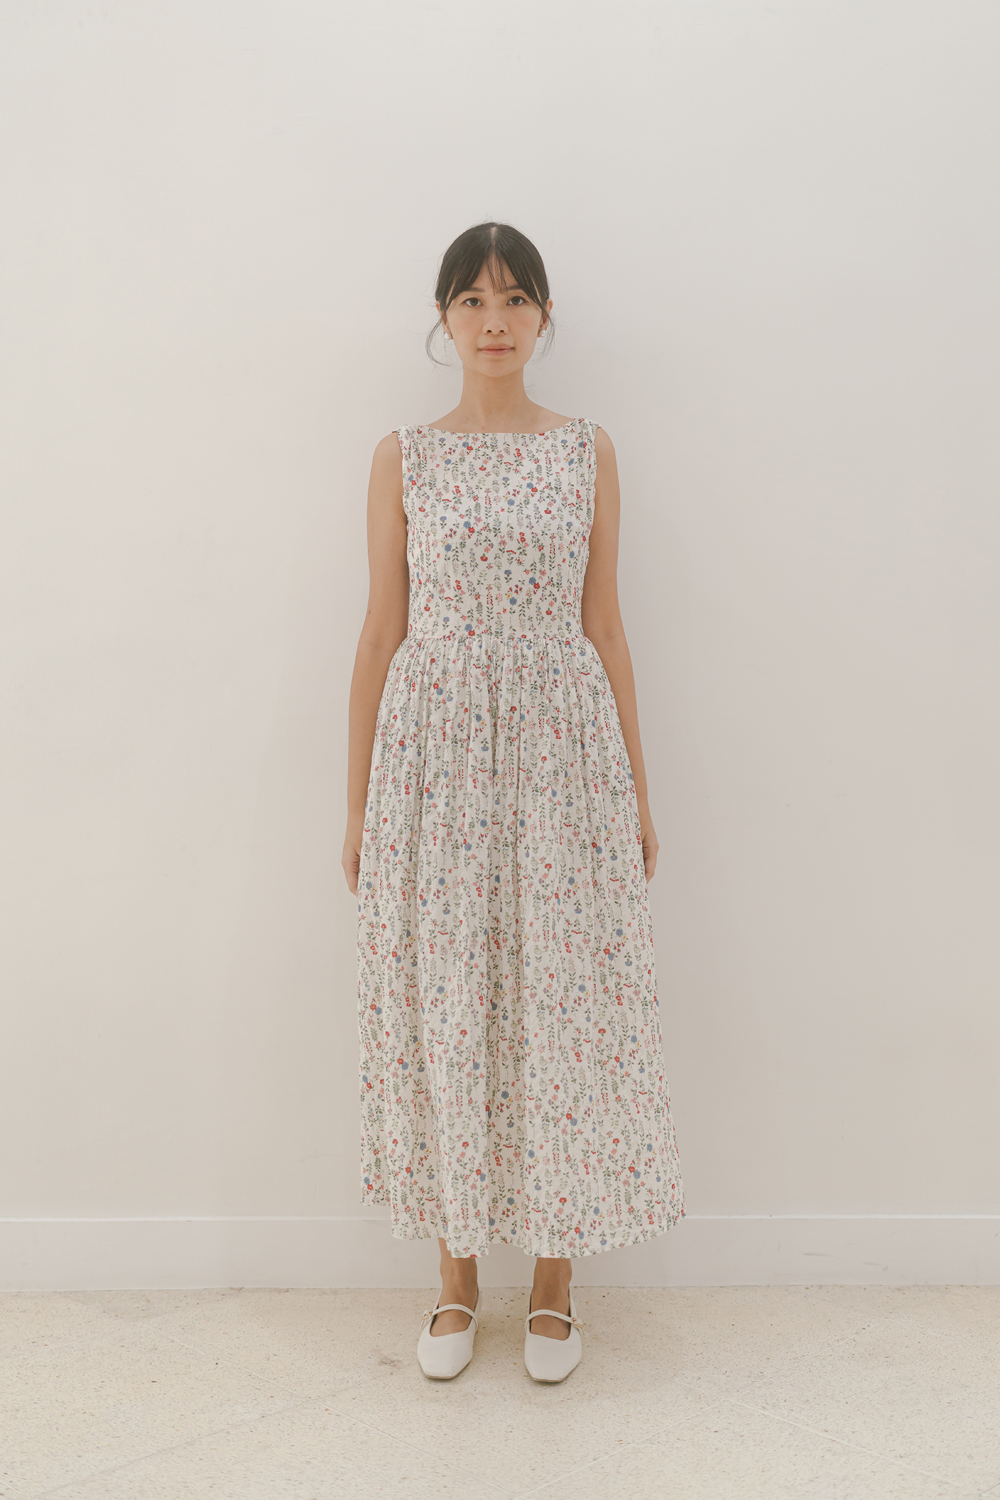 Yumi Boat Neck Dress in Floral